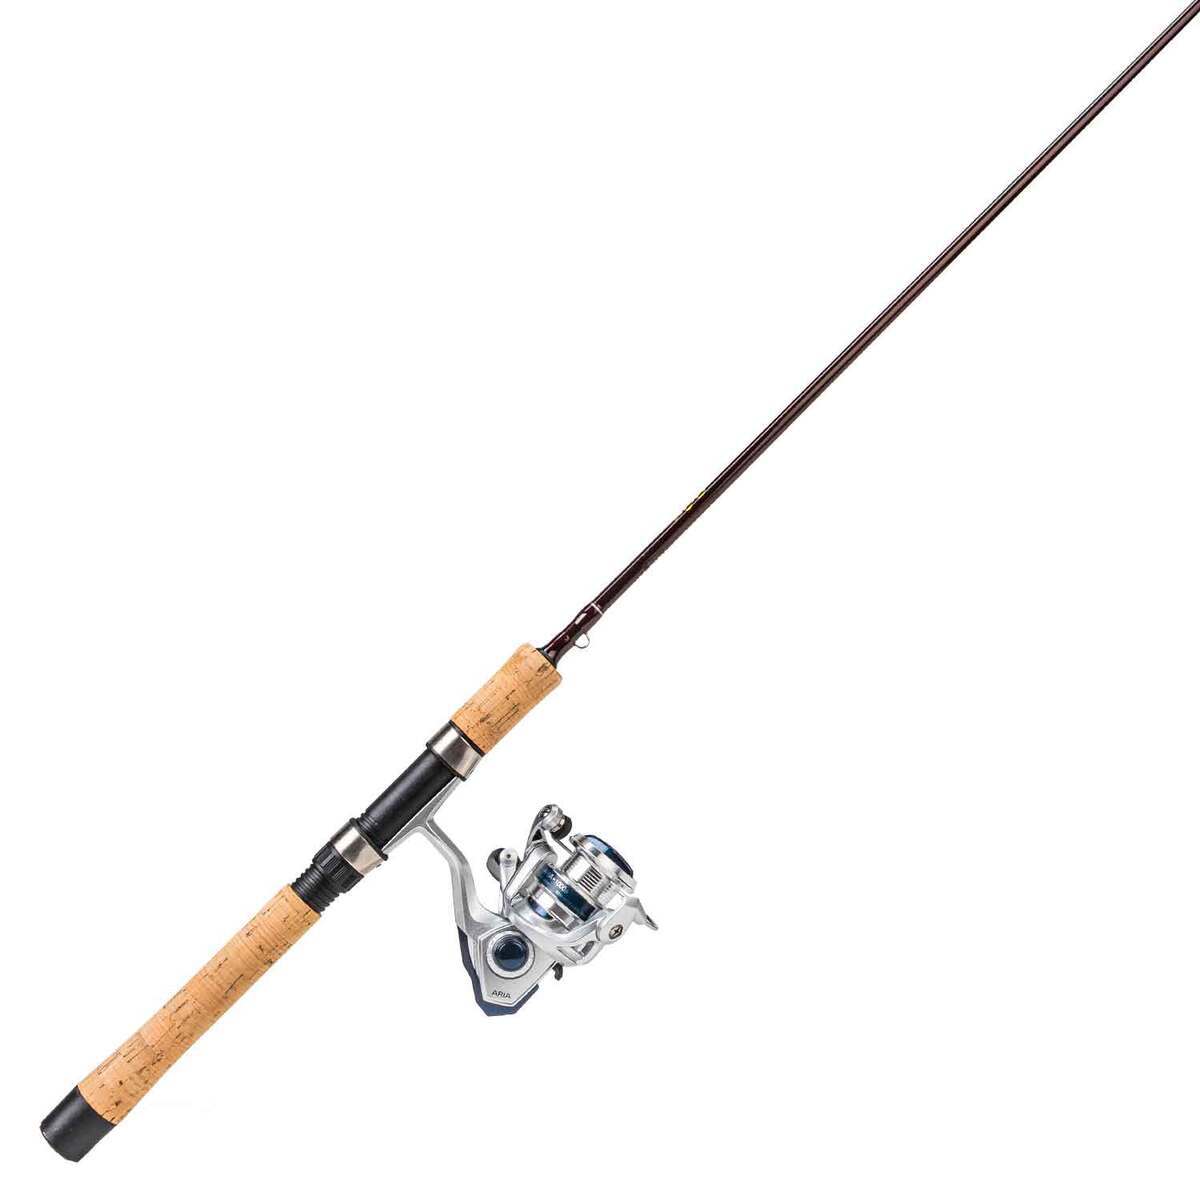 Shop Rod and Reel Combos  Fishing Rod & Reel Combos Online